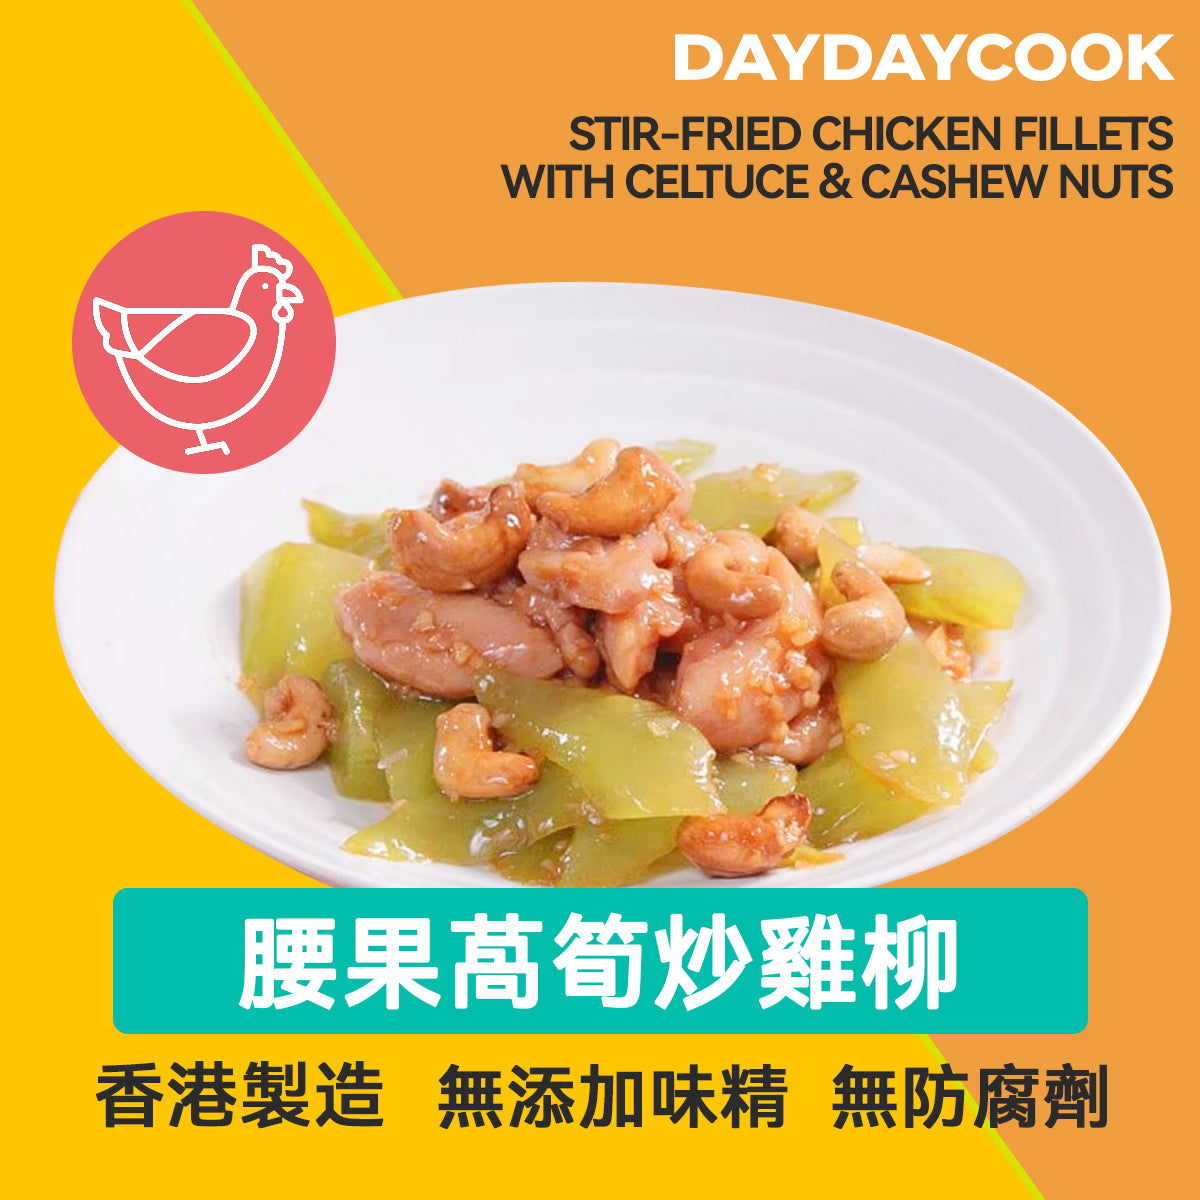 Stir-Fried Chicken Fillets With Celtuce and Cashew Nuts